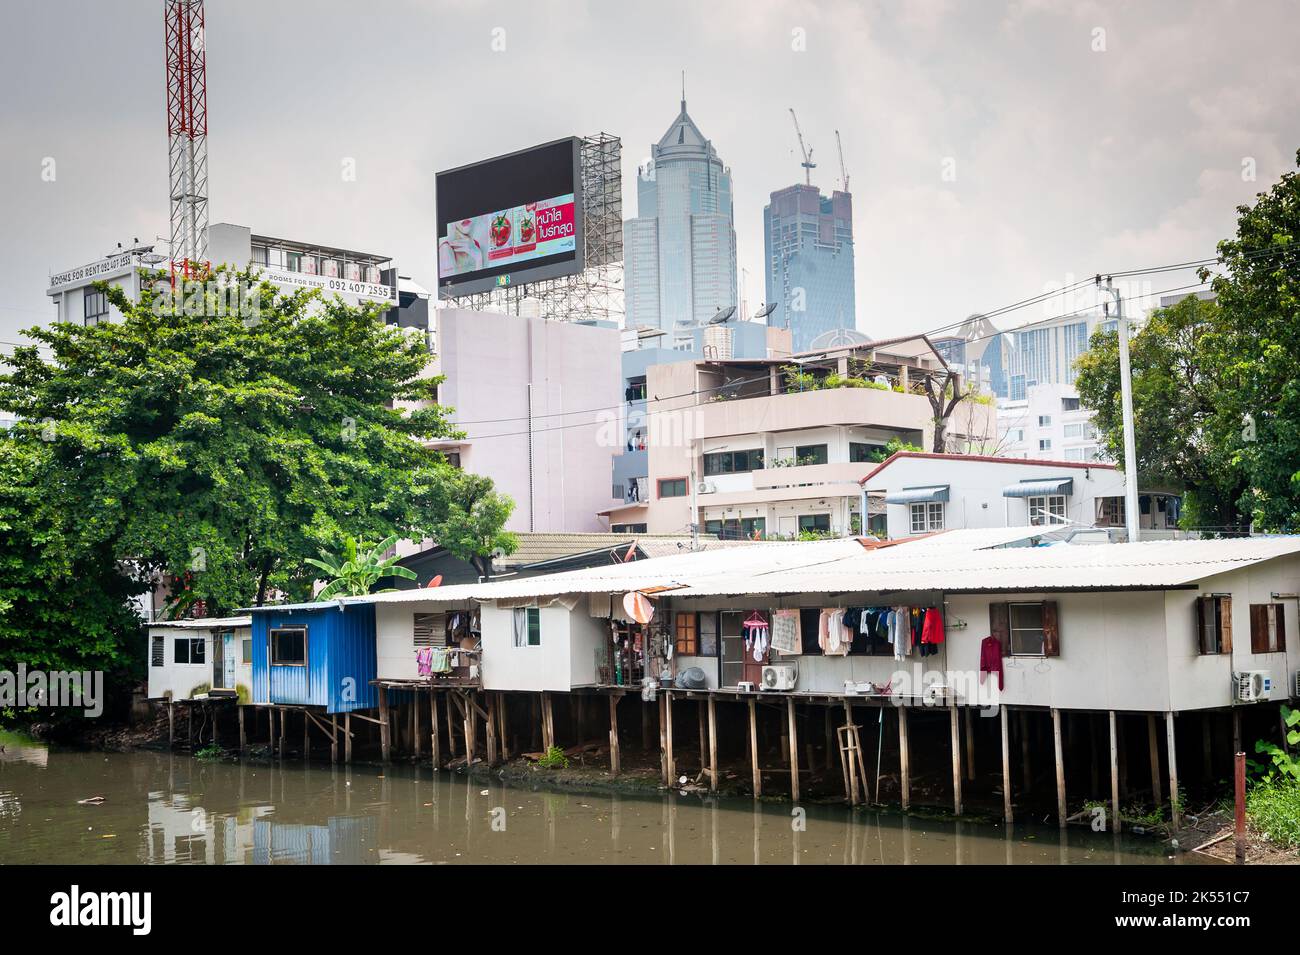 Traditional old Thai houses on stilts above a river contrast against modern high rise sky scrapers in the Soi Ruamrudee Community, Bangkok, Thailand. Stock Photo